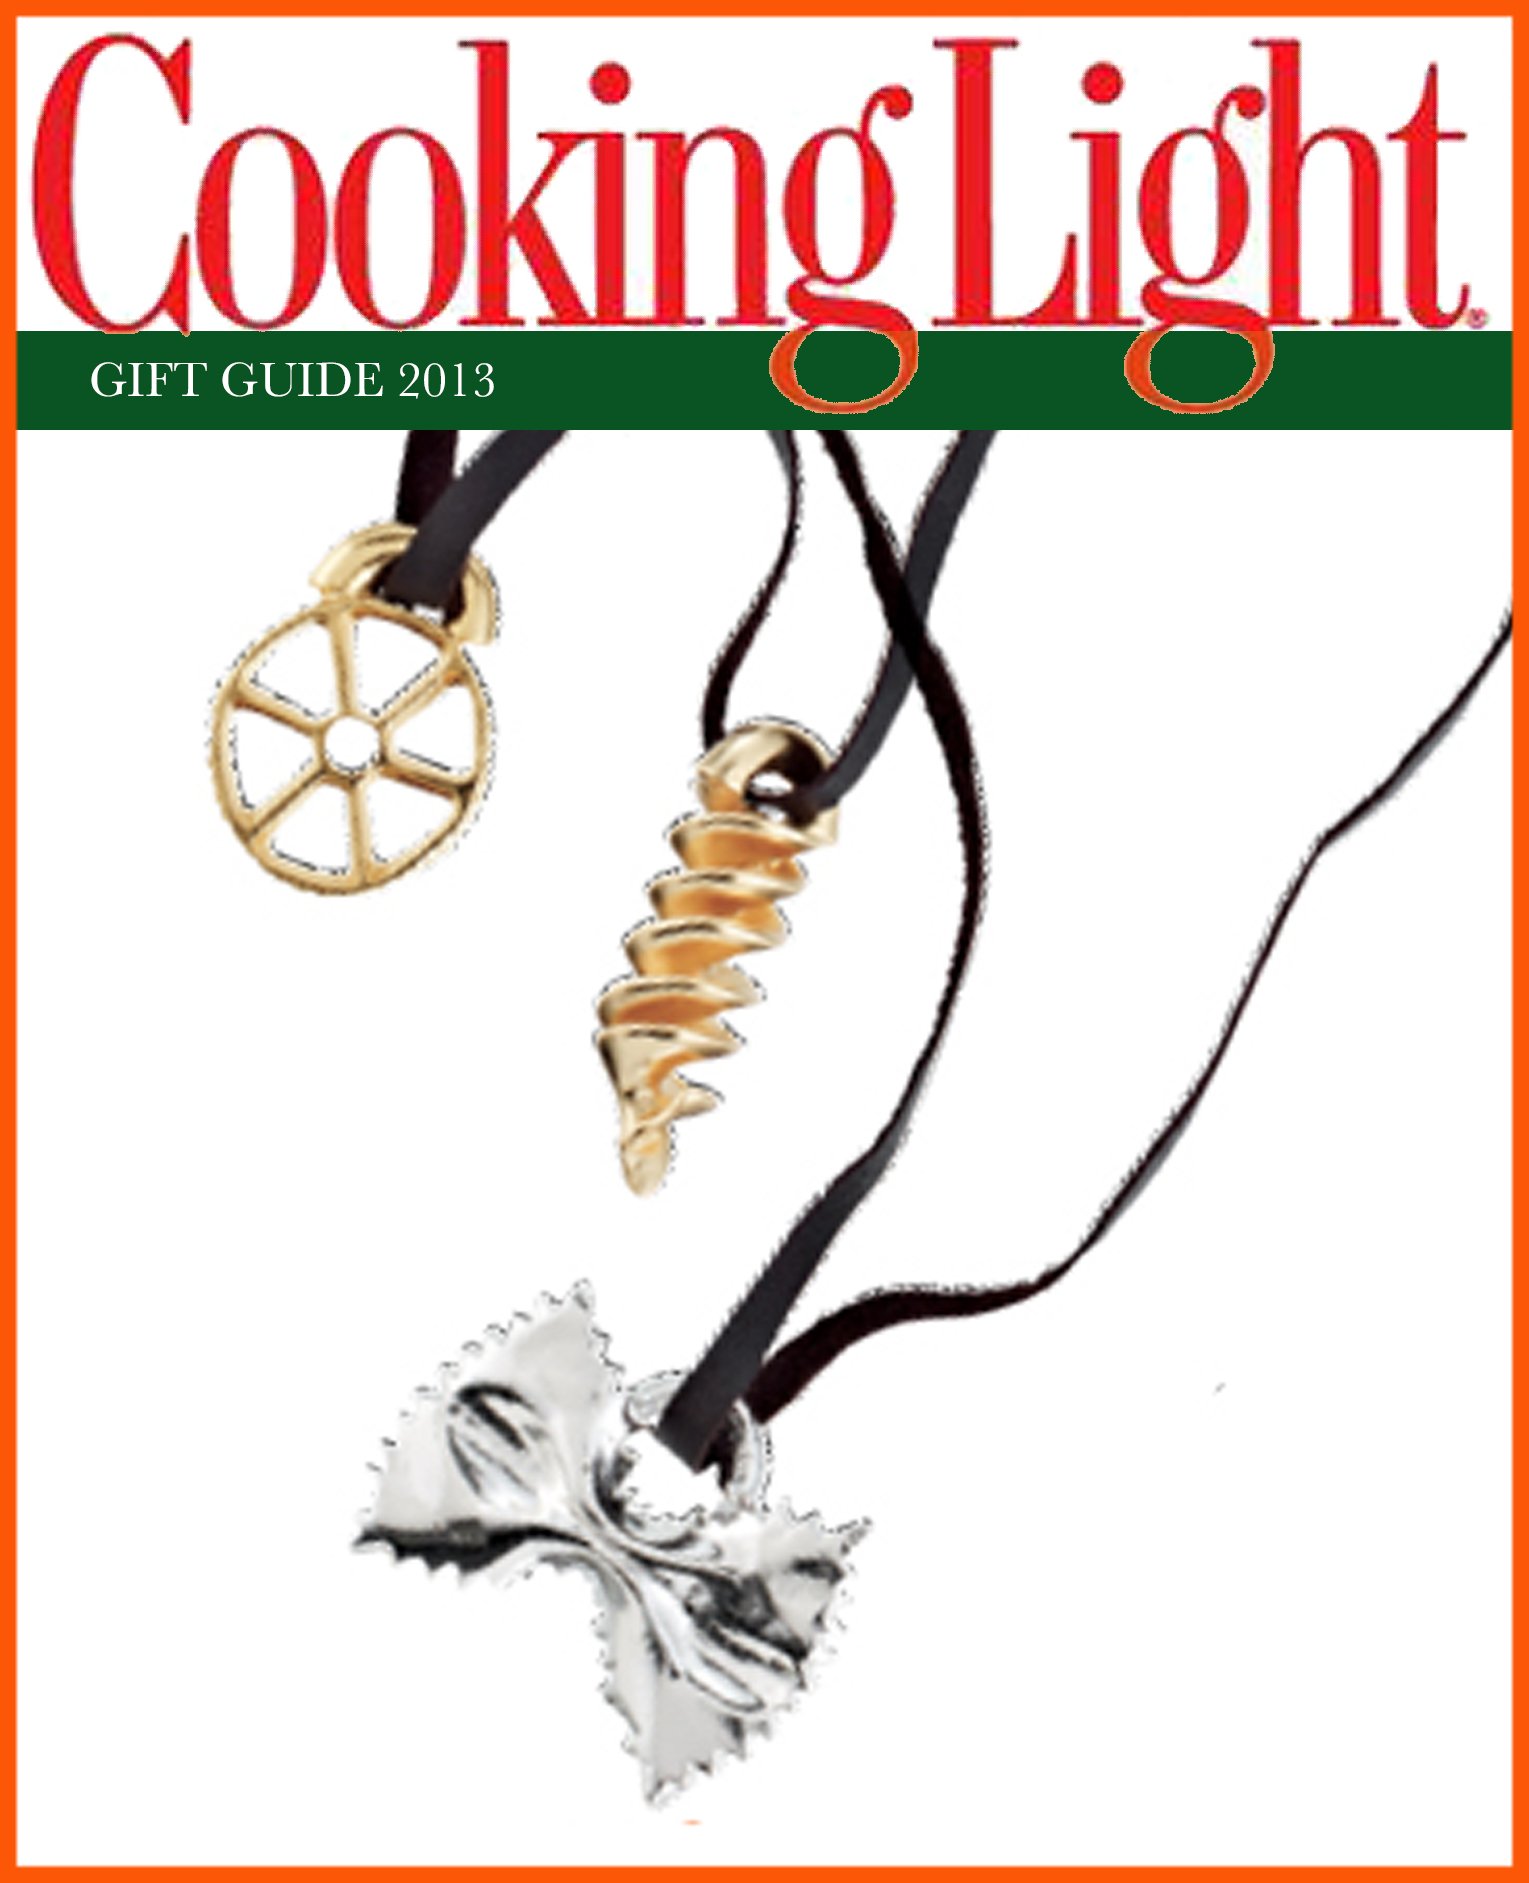 Cooking Light green trim giftguide.jpg